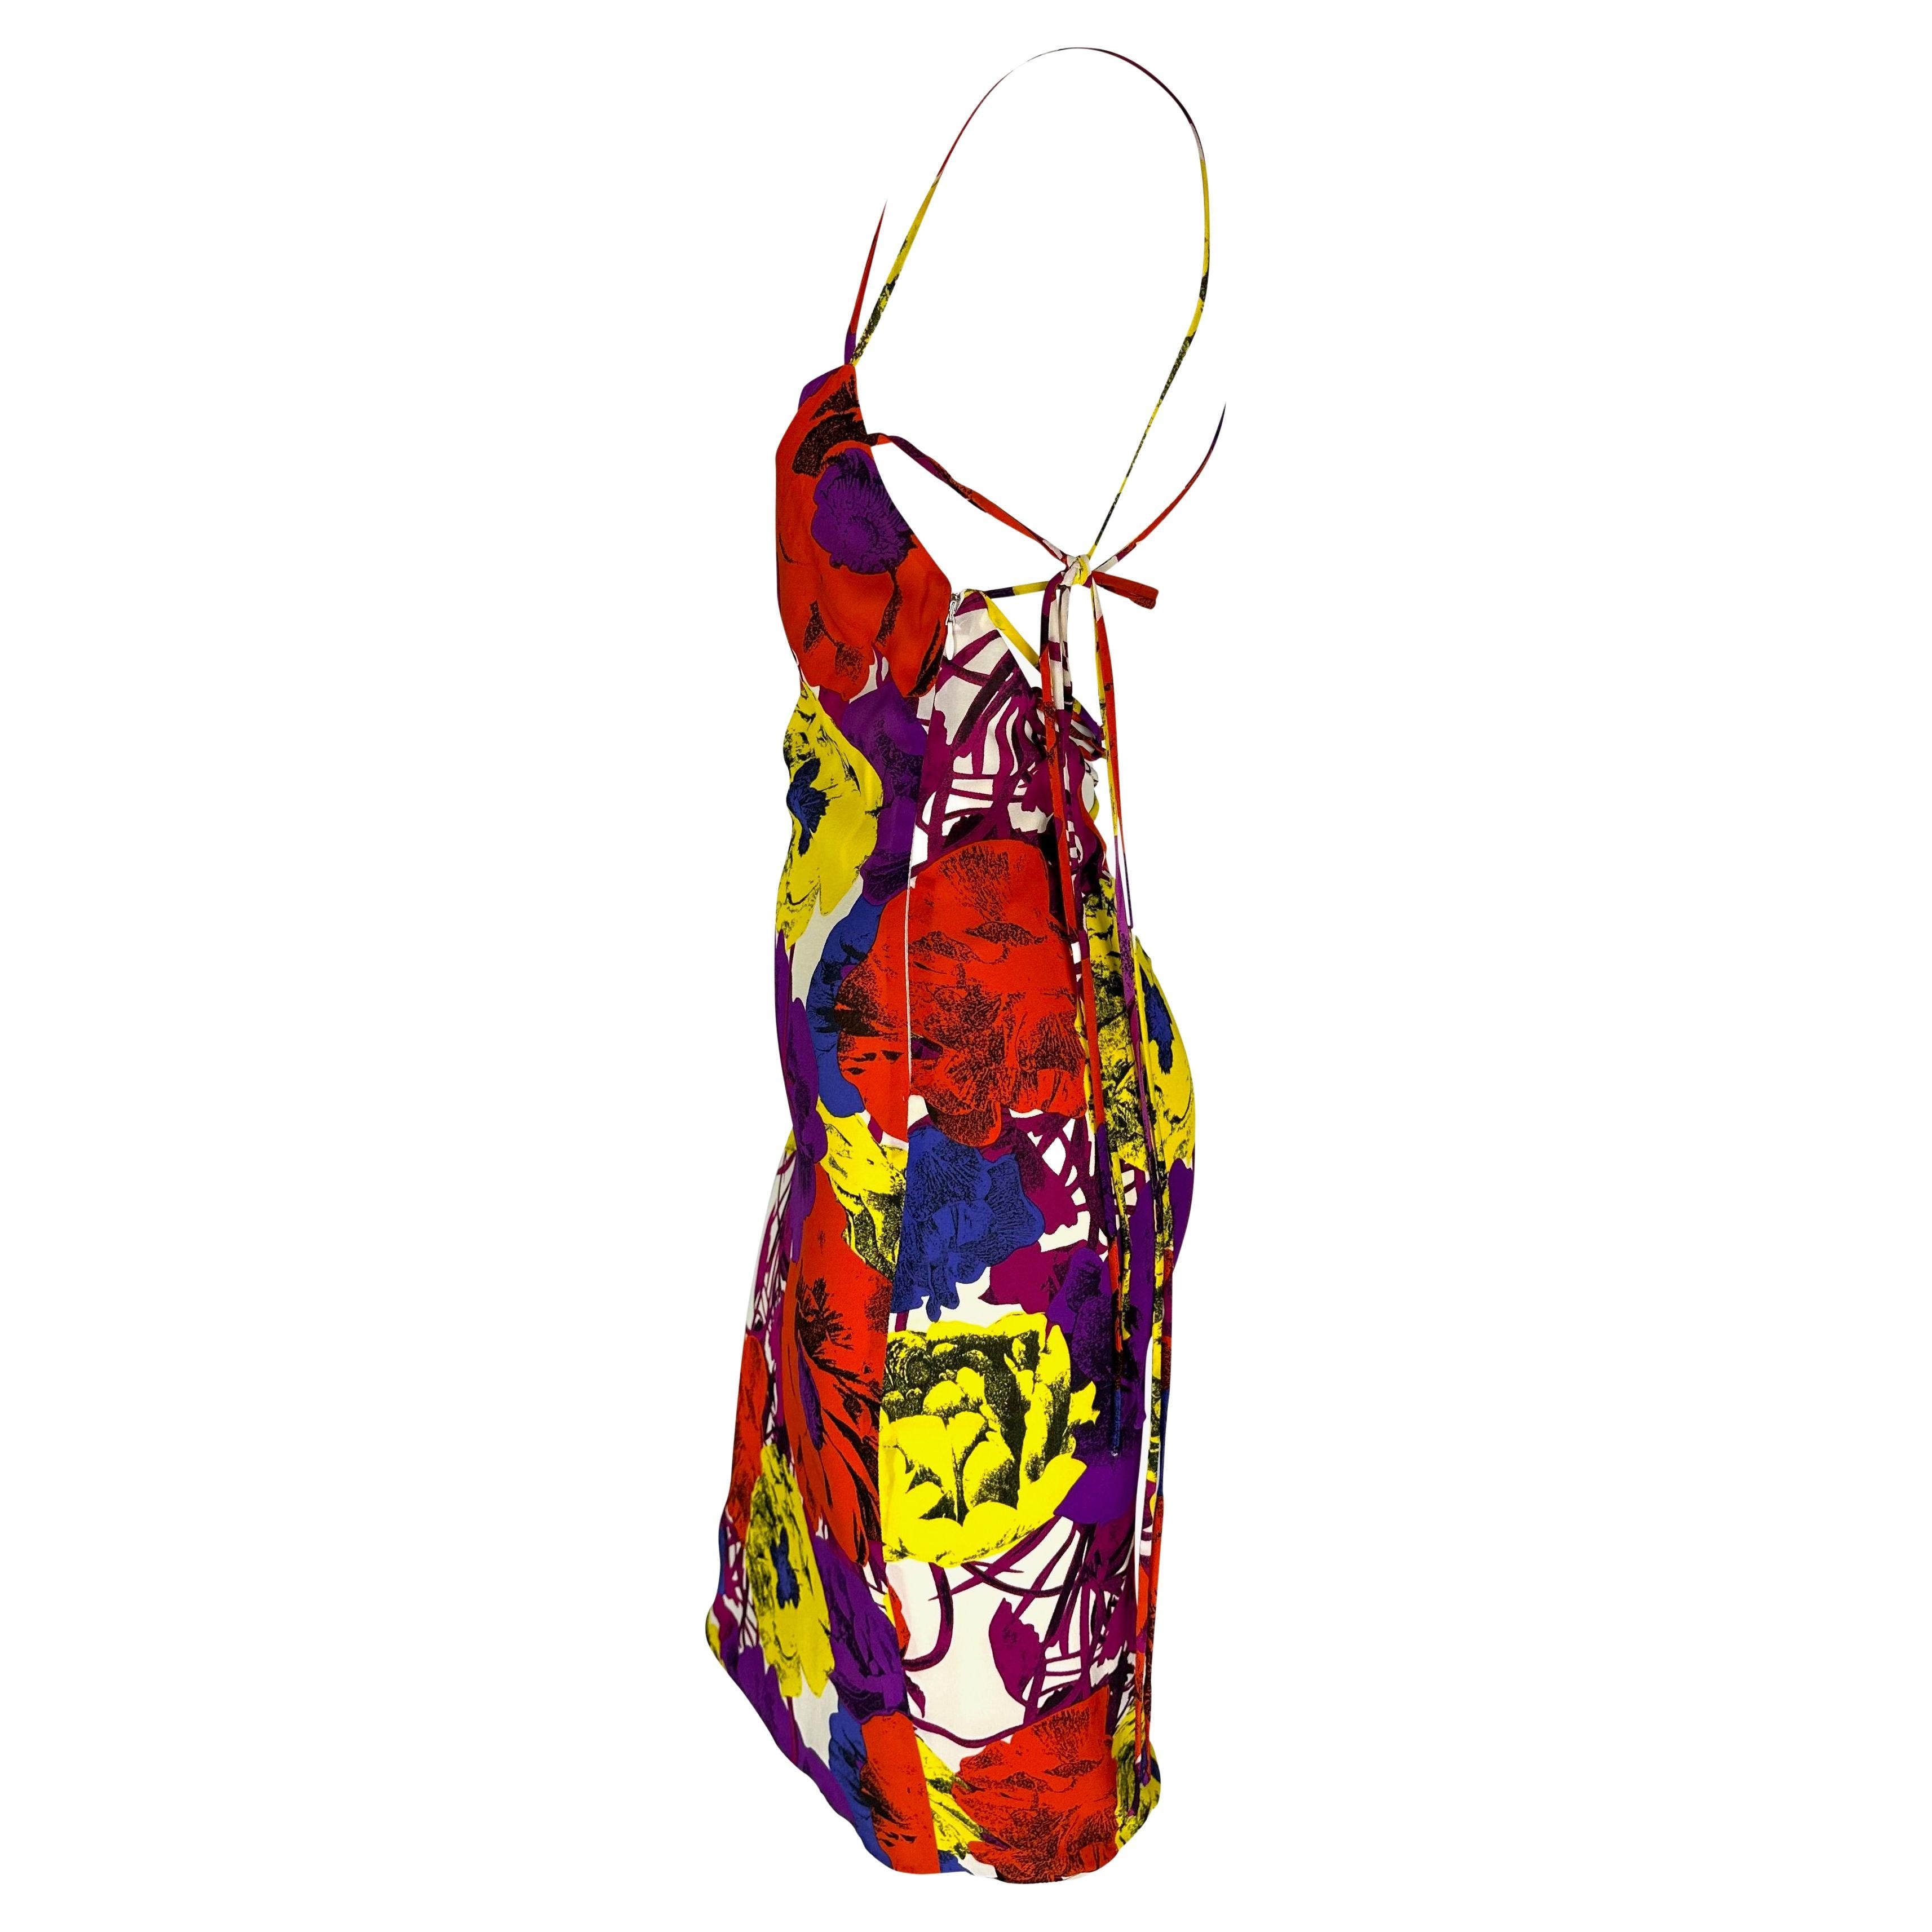 S/S 2002 Gianni Versace by Donatella Pop Art Floral Print Lace-Up Backless Dress For Sale 1